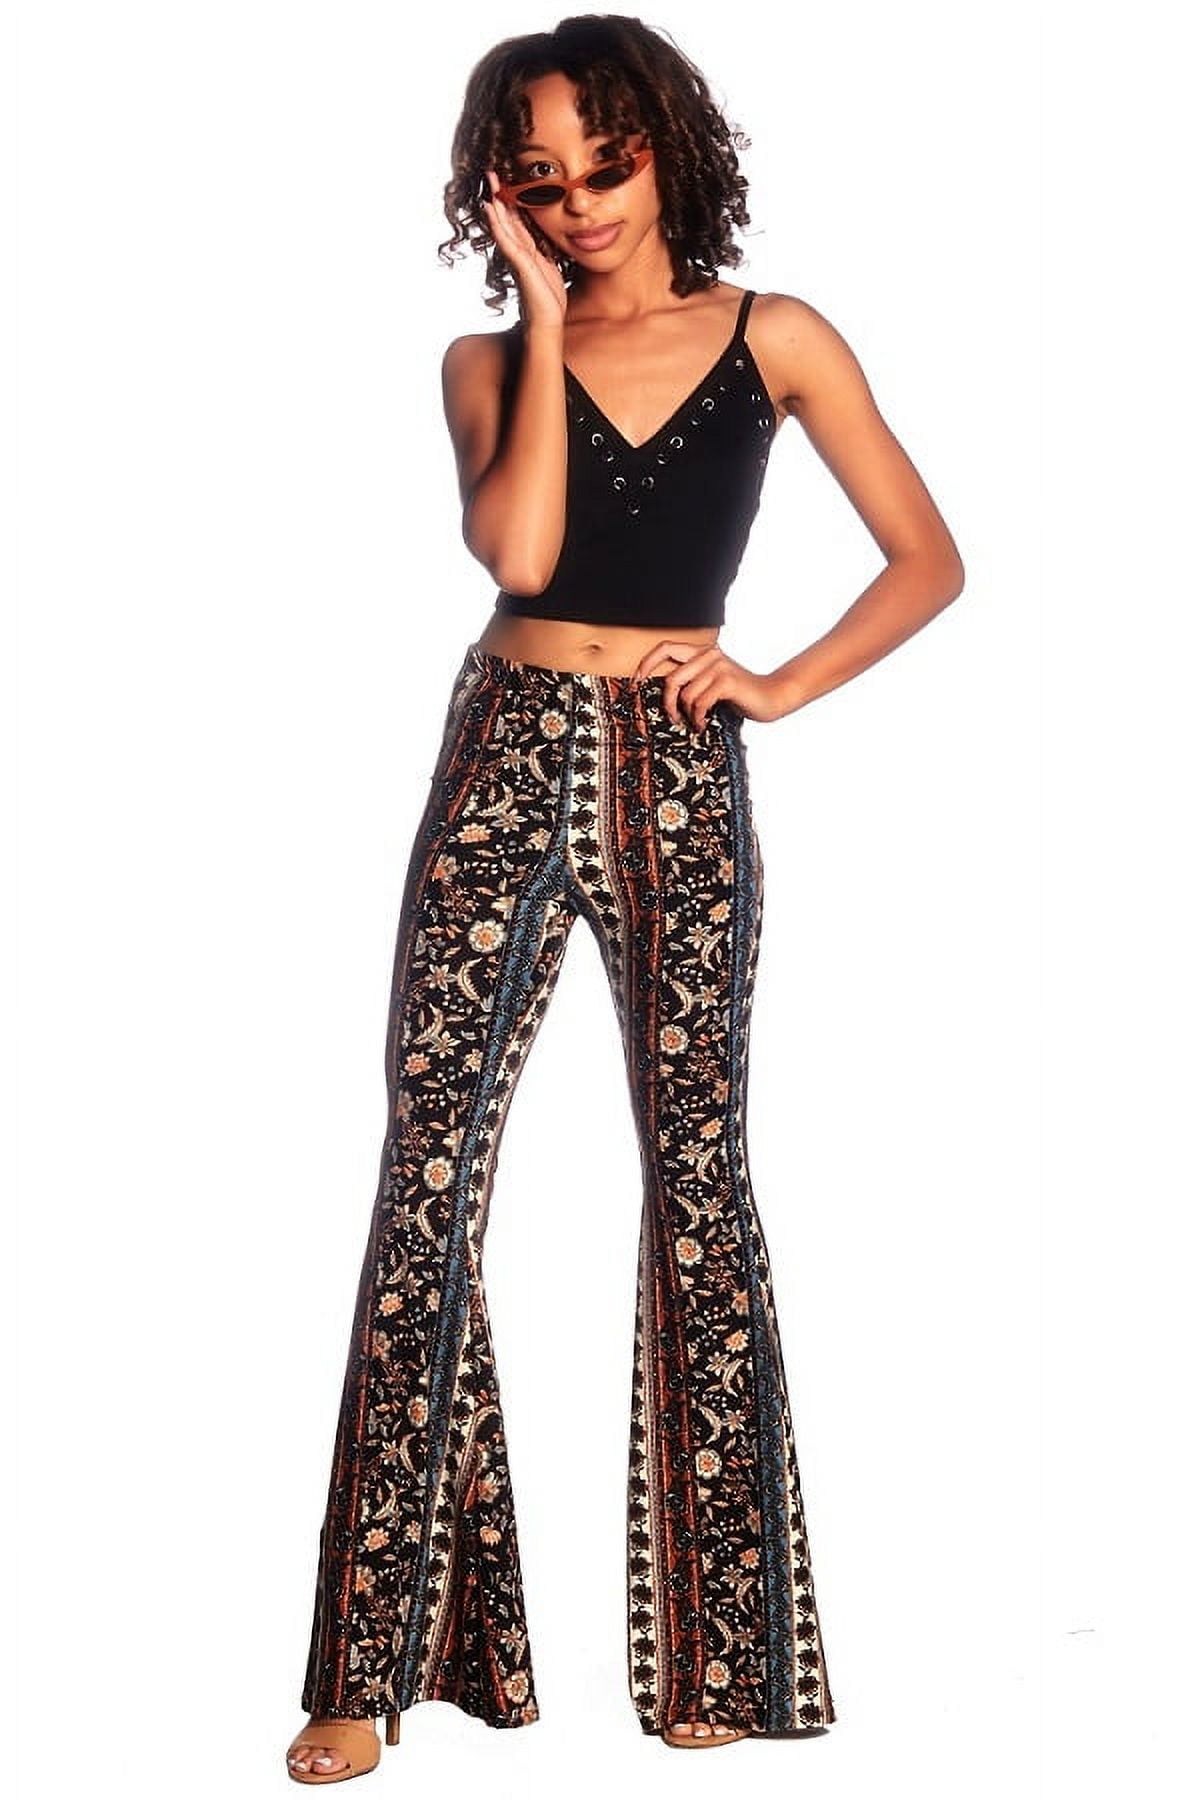 SWEETKIE Boho Flare Pants, Elastic Waist, Wide Leg Pants for Women, Solid &  Printed, Stretchy and Soft 